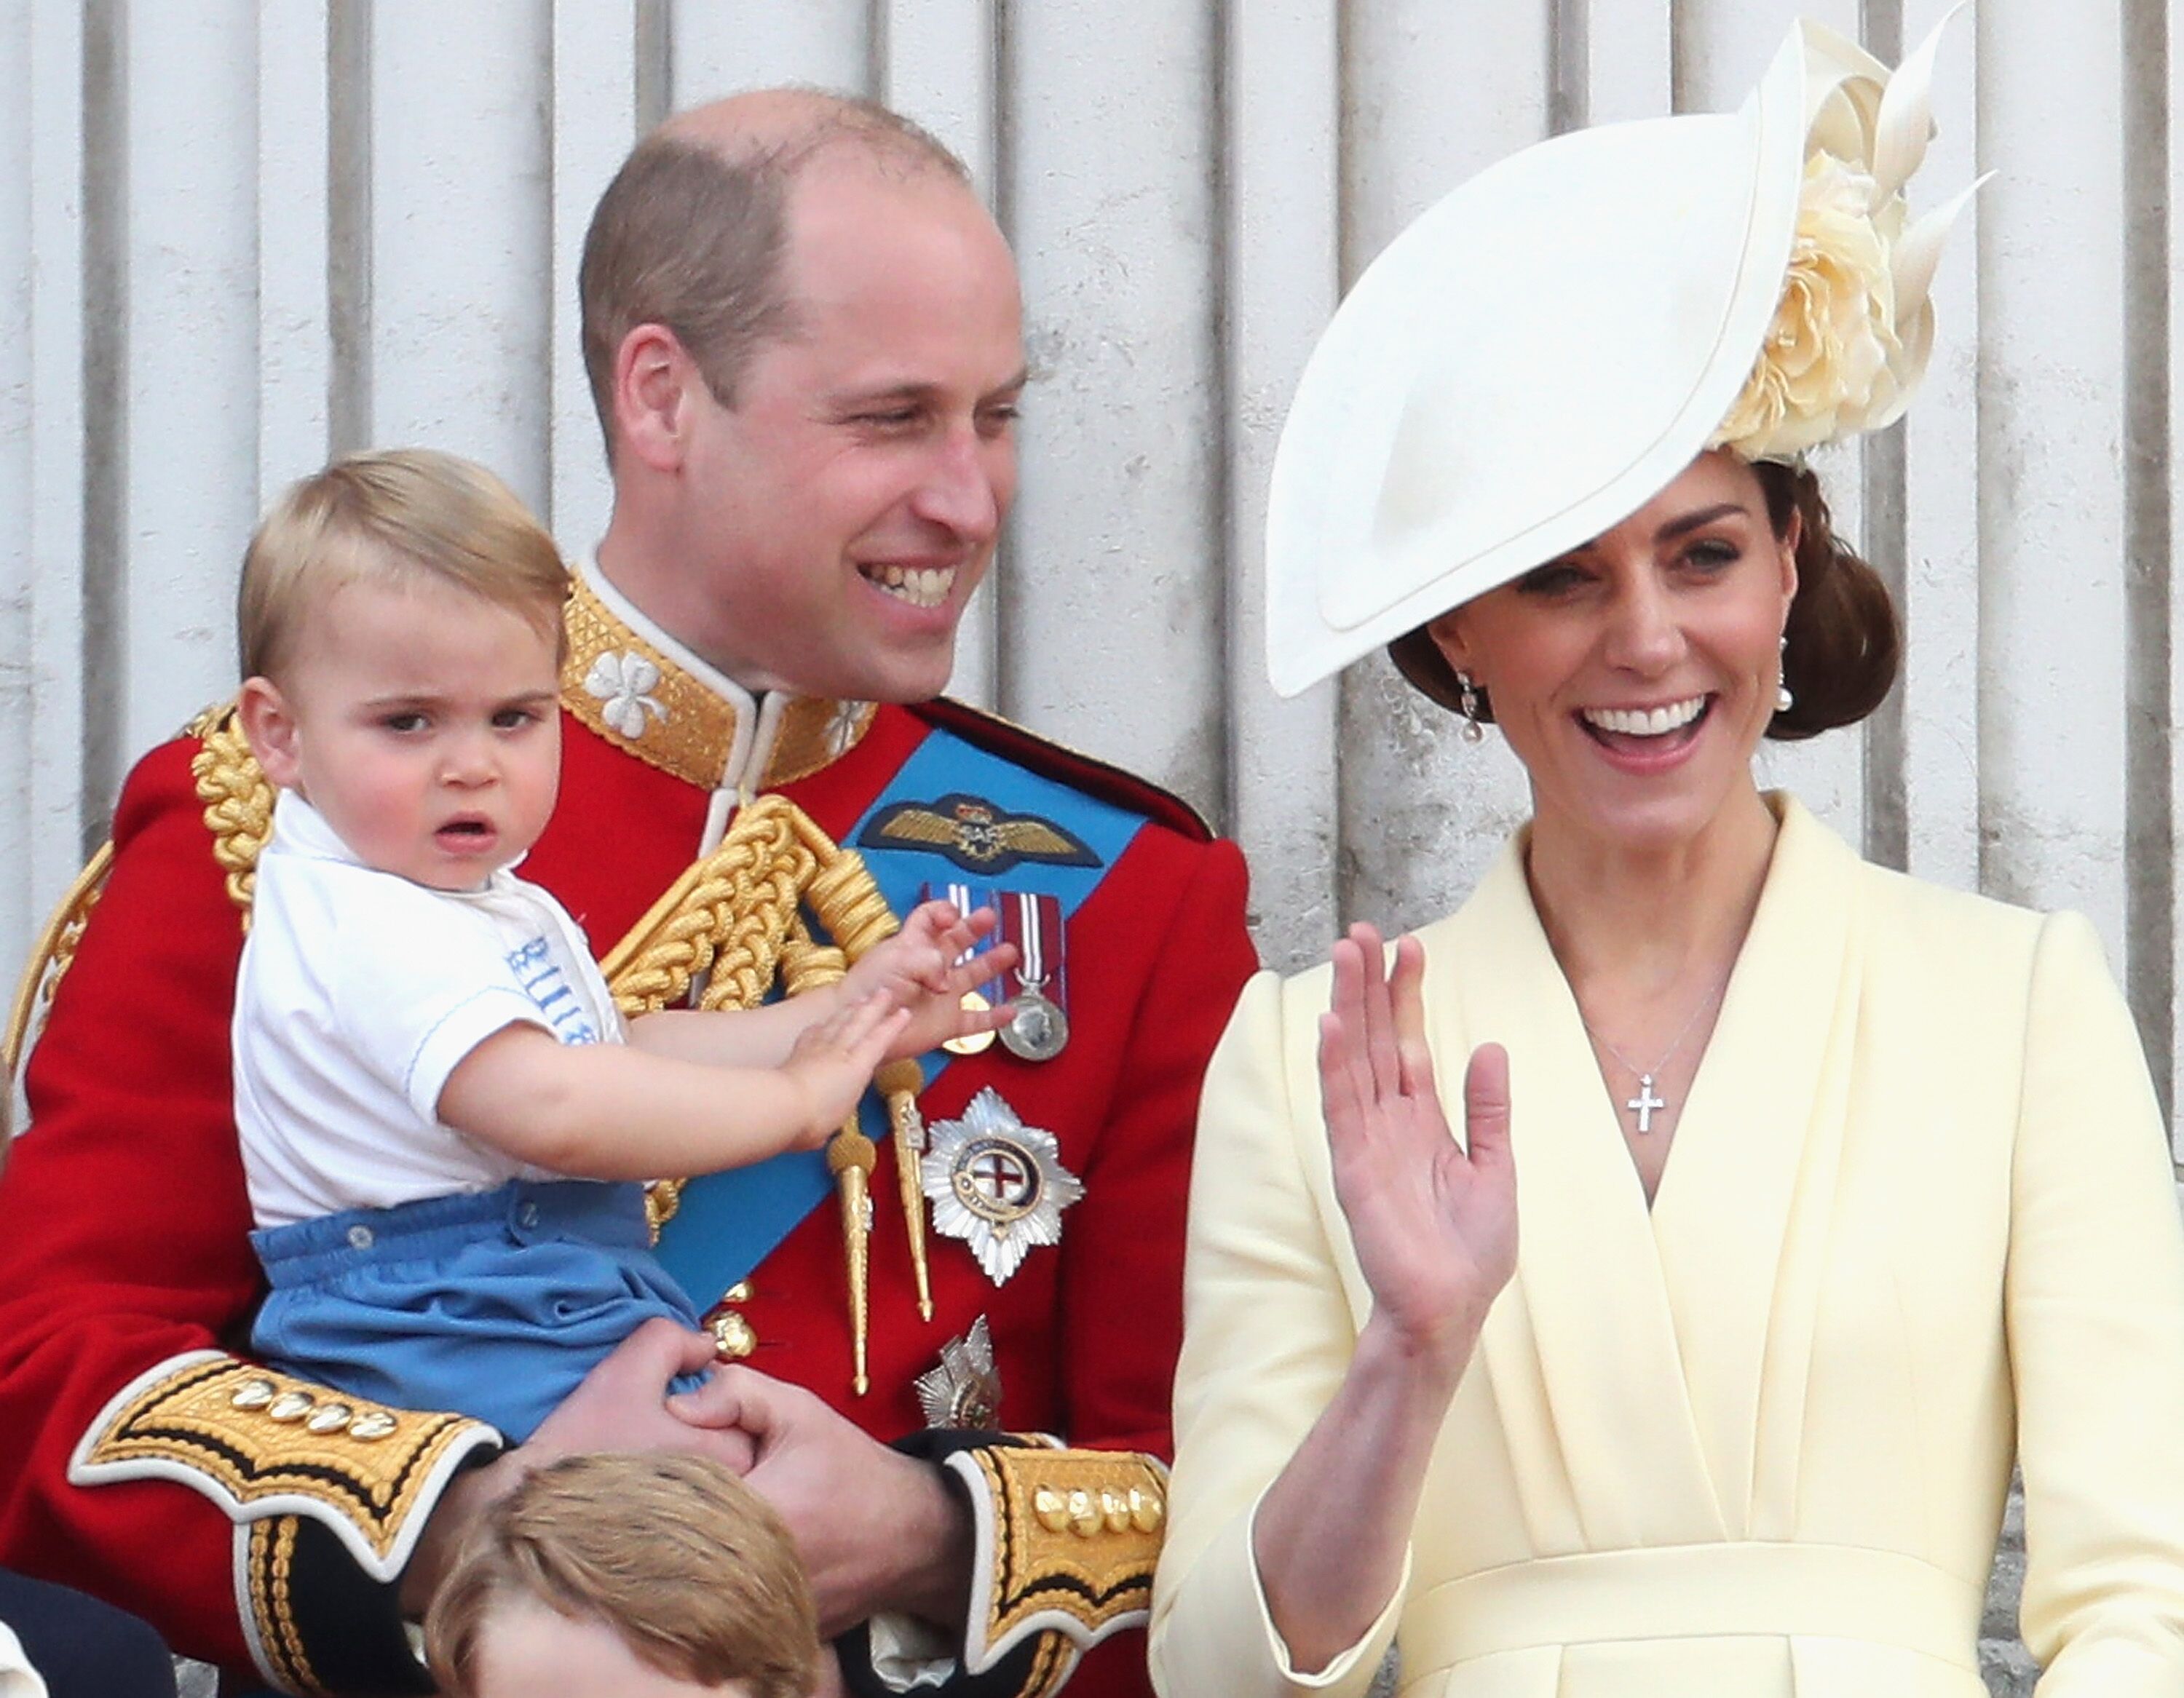 Prince William, Kate Middleton, and Prince Louis during Trooping The Colour, the Queen's annual birthday parade, on June 8, 2019 in London, England. | Source: Getty Images